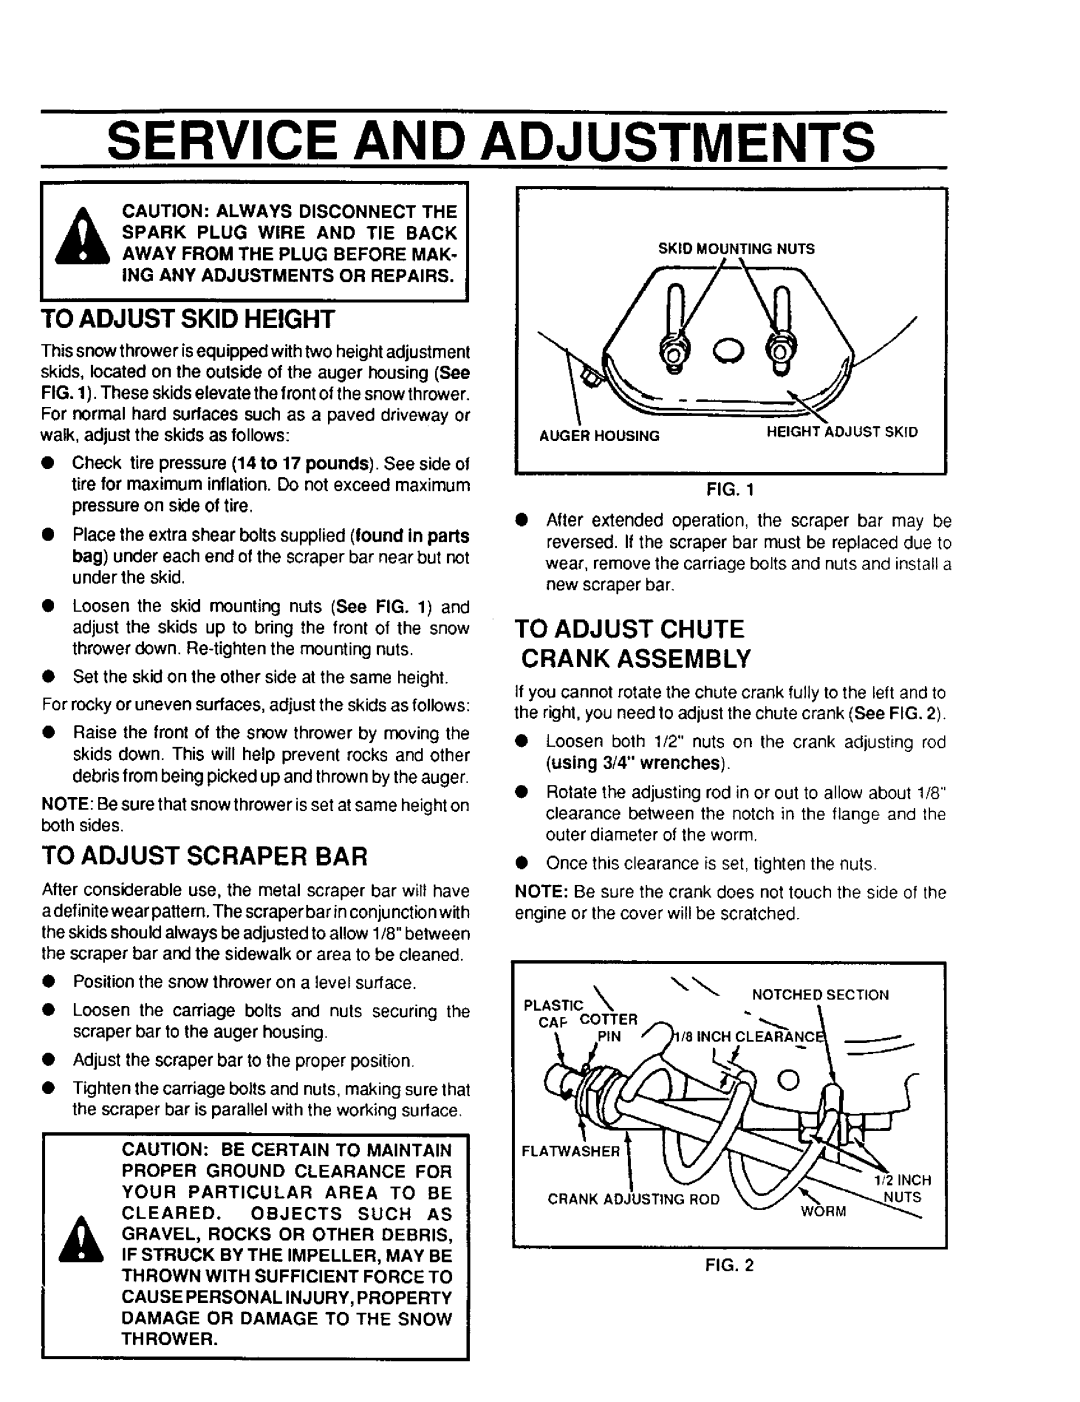 Sears 536.886331 Service And Adjustments, To Adjust Skid Height, To Adjust Scraper Bar, To Adjust Chute Crank Assembly 